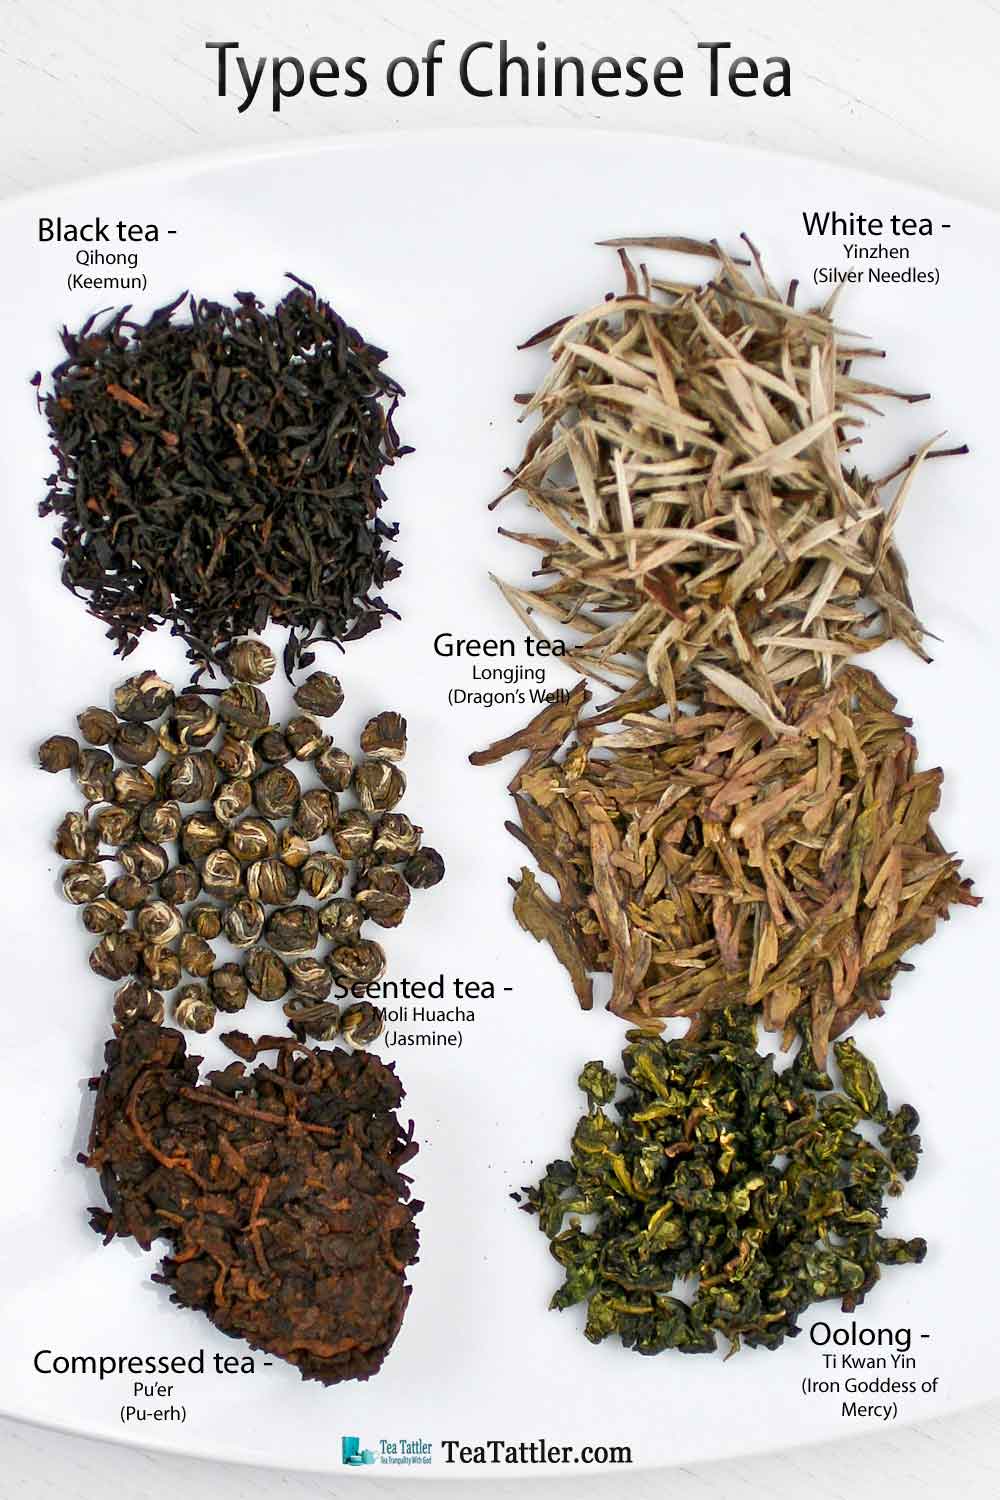 Types of Chinese Tea - white, green, oolong, black, scented, and compressed coming from the same tea plant but each processed differently. | TeaTattler.com #chineseteas